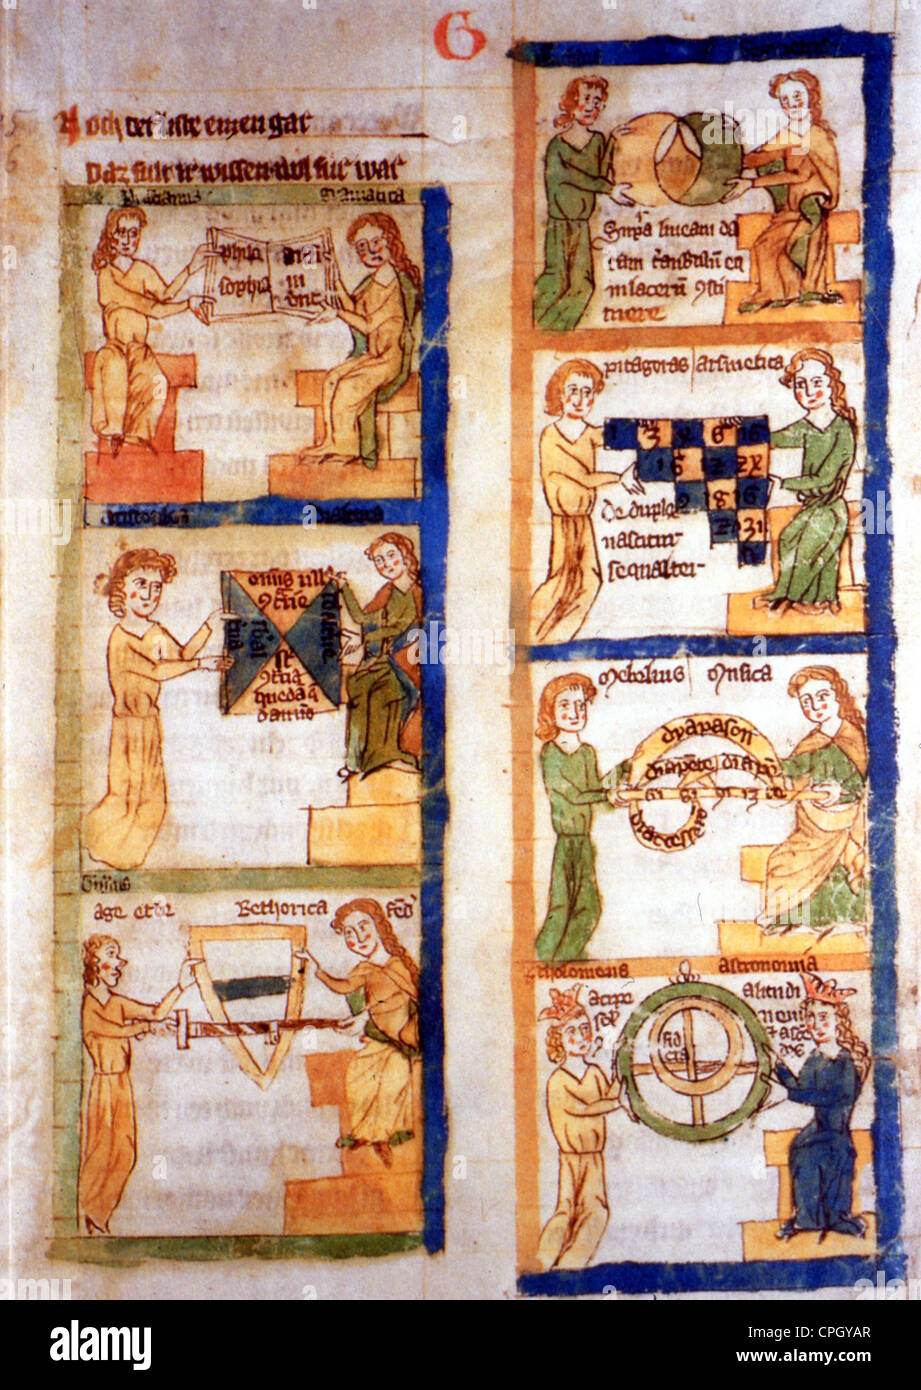 science, allegories, liberal arts, miniature from 'Der Welsche Gast', by Thomasin v. Zerklaere, 14th century, Erlangen university library, Germany, , Additional-Rights-Clearences-Not Available Stock Photo